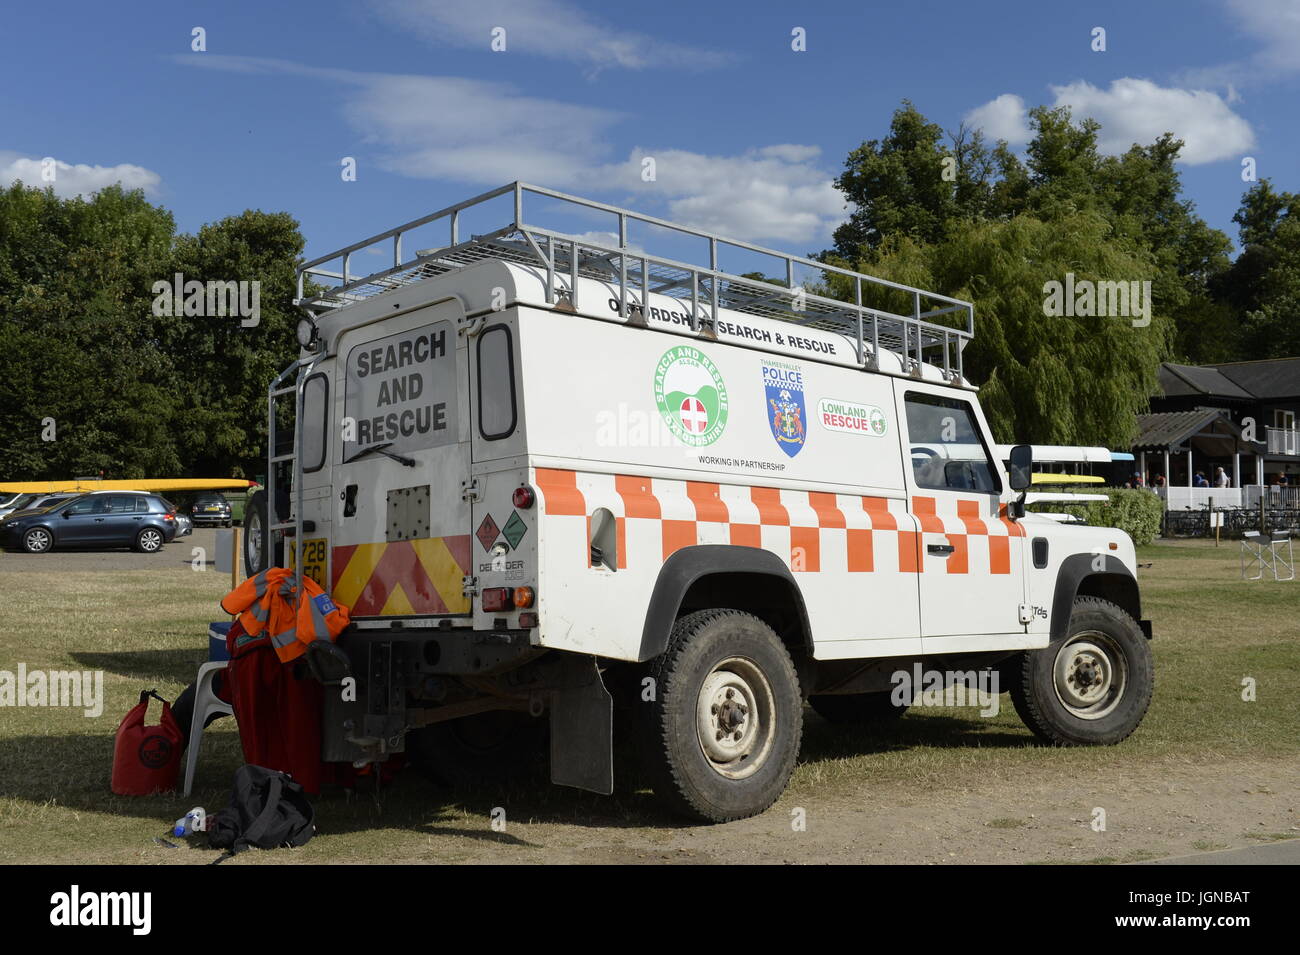 Search and Rescue vehicle at Henley regatta Stock Photo